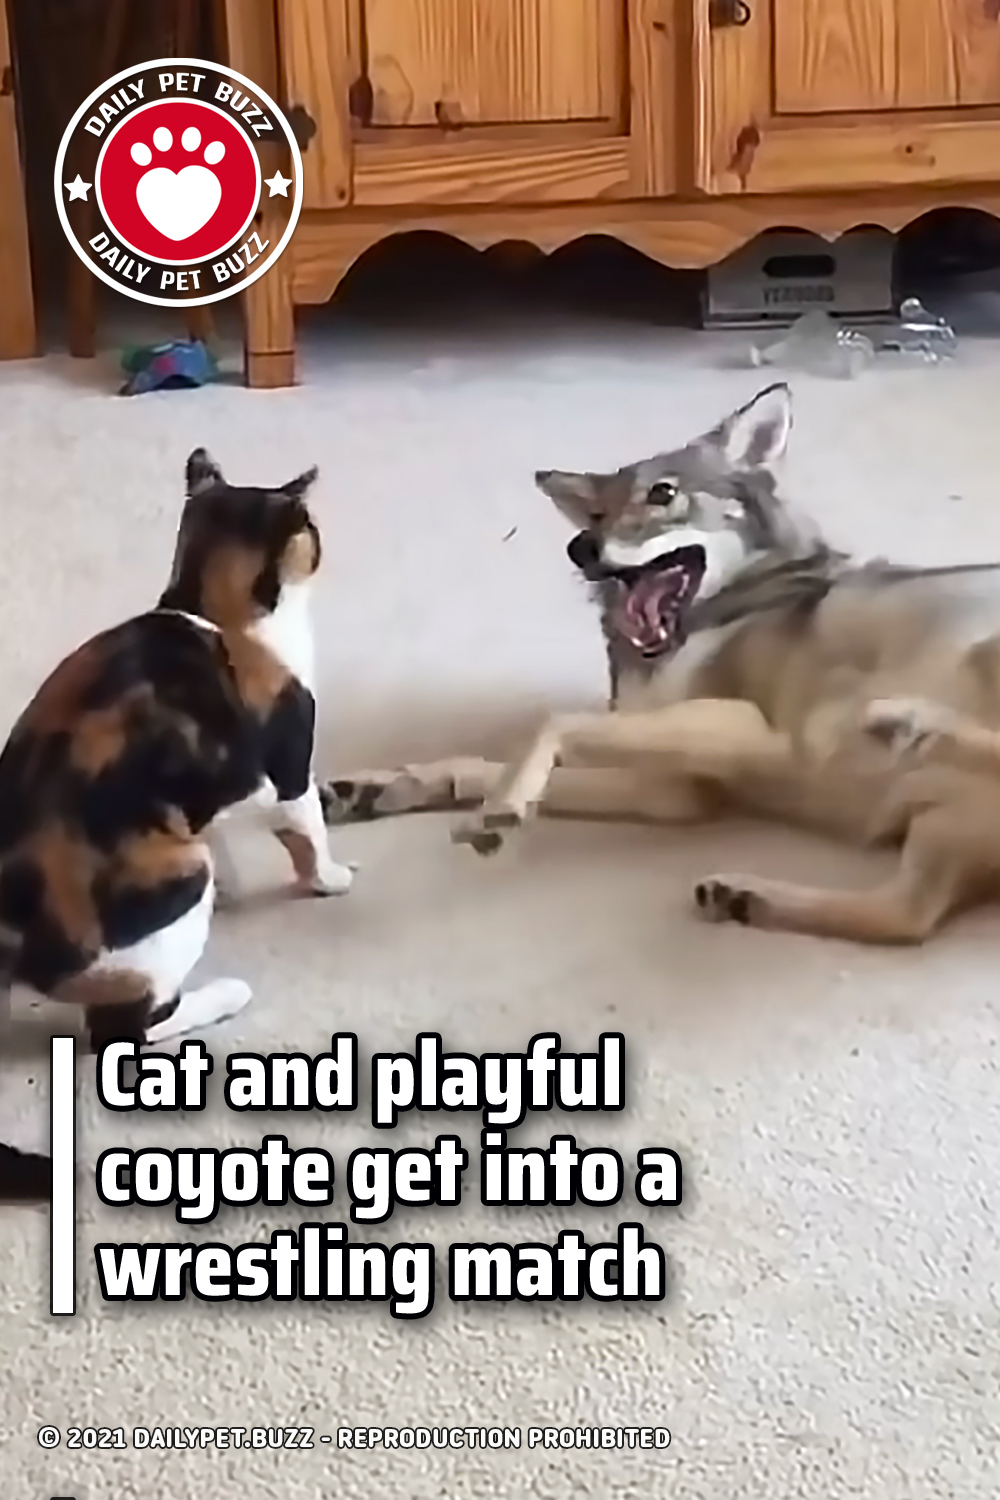 Cat and playful coyote get into a wrestling match